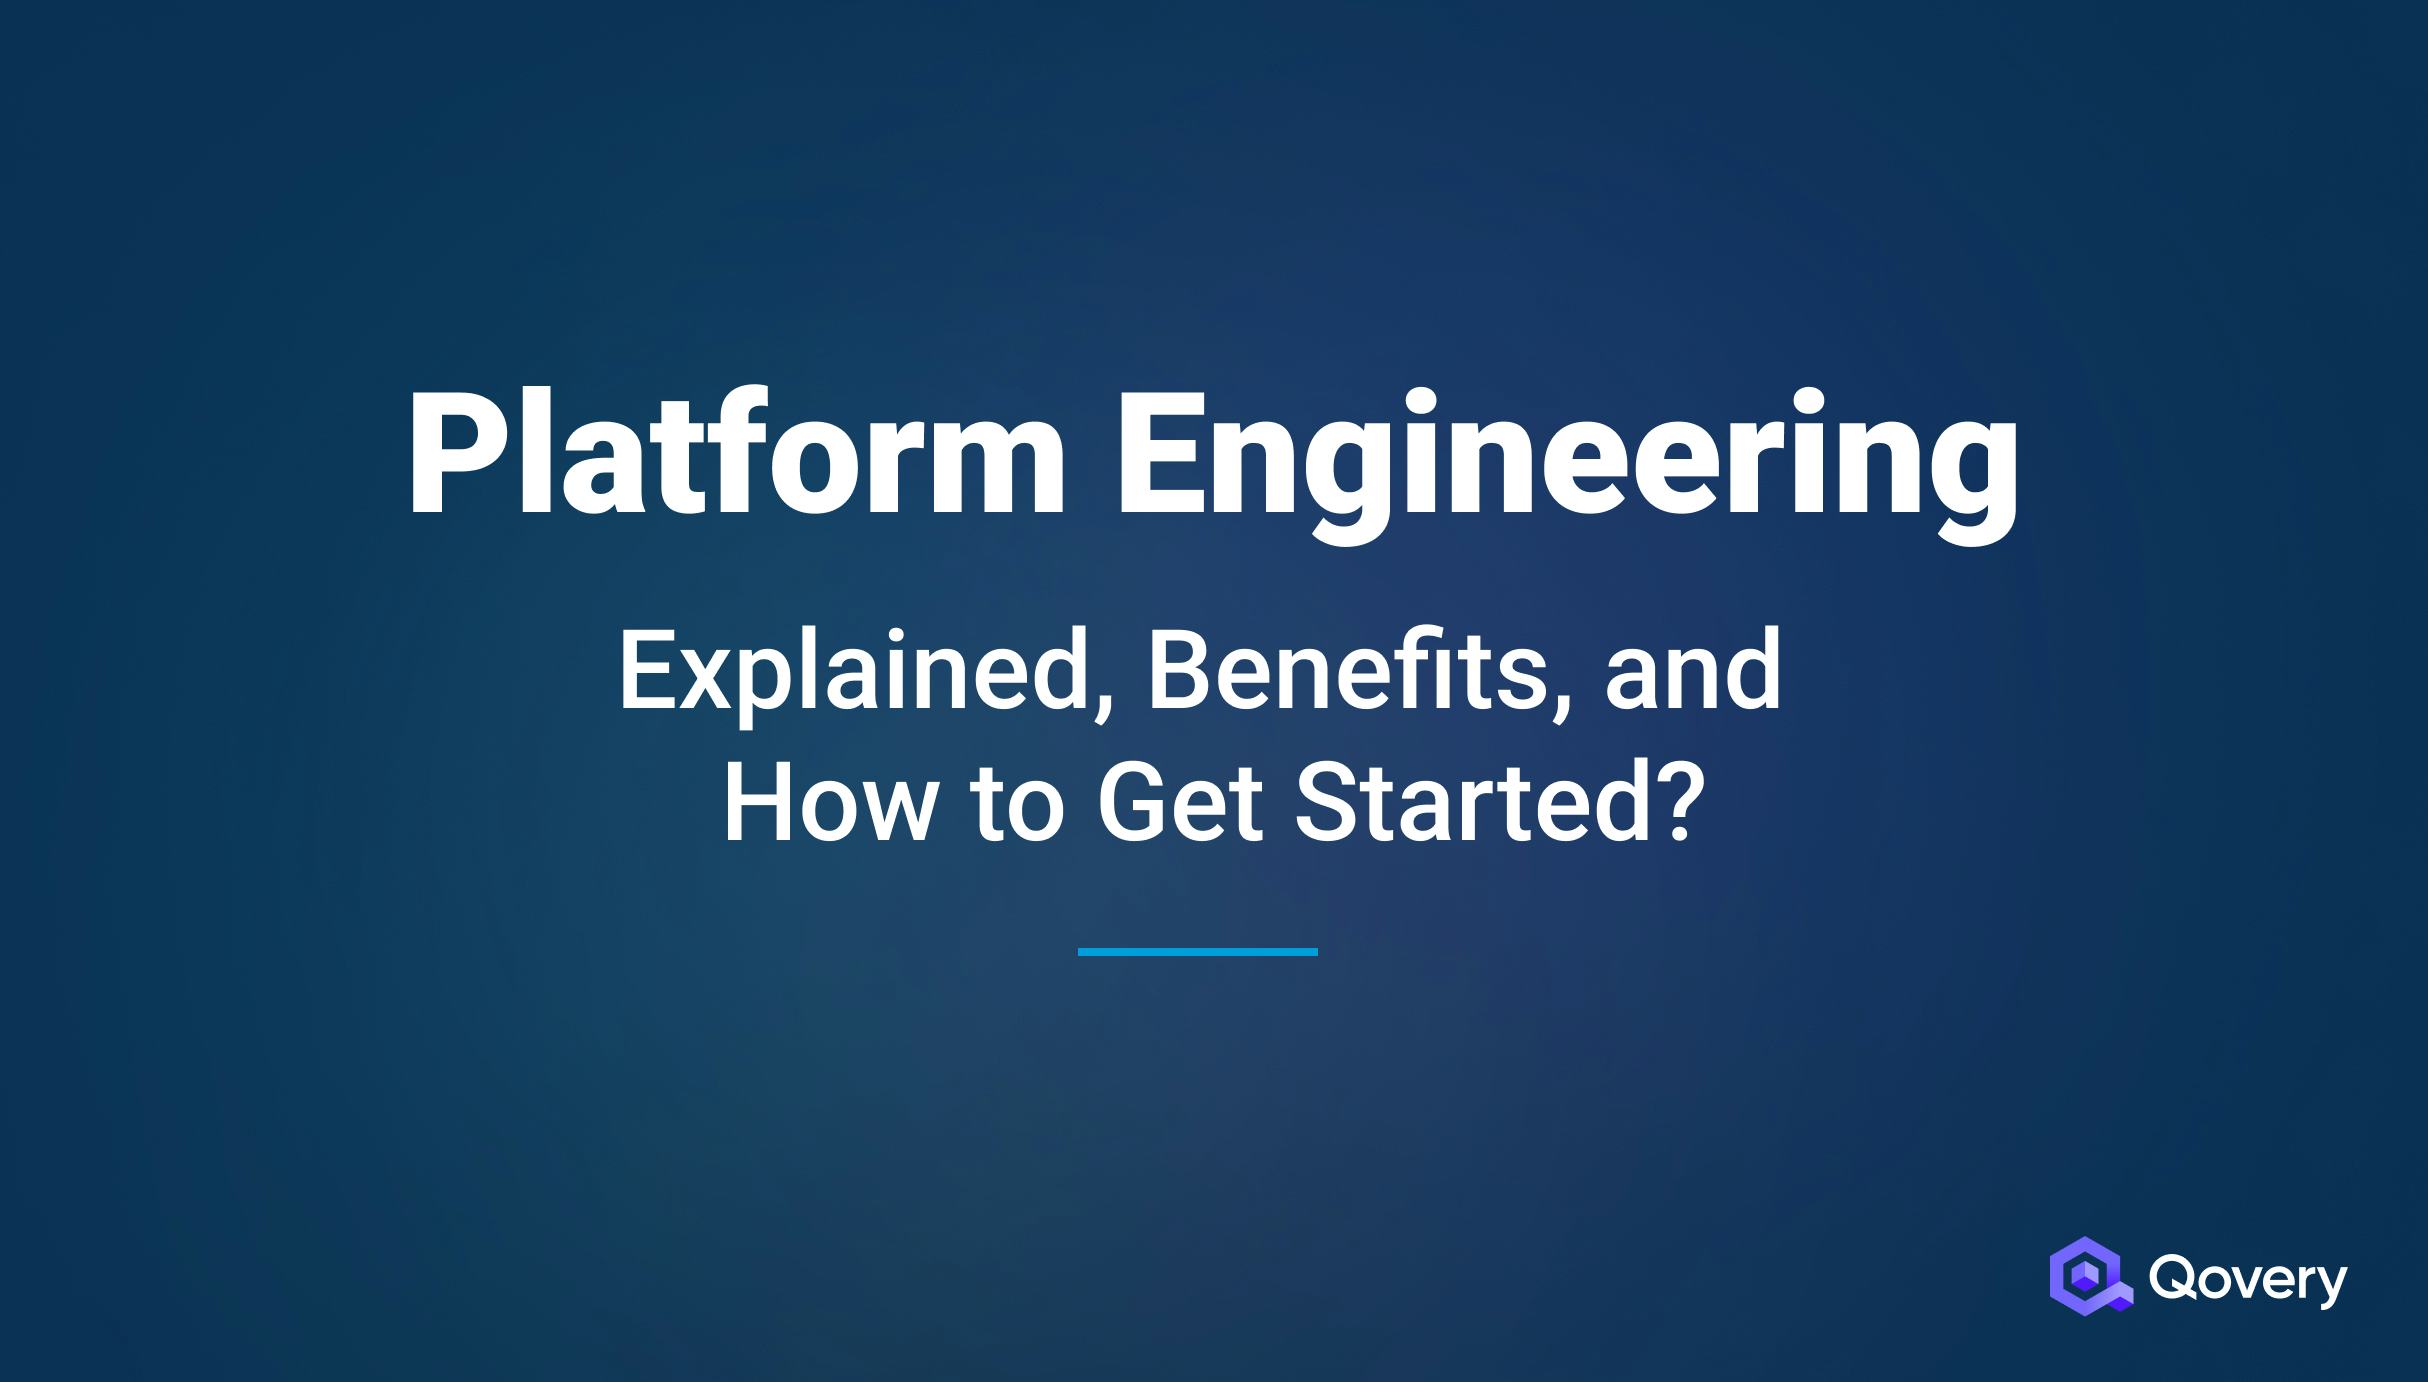 Platform Engineering: Explained, Benefits, and How to Get Started?